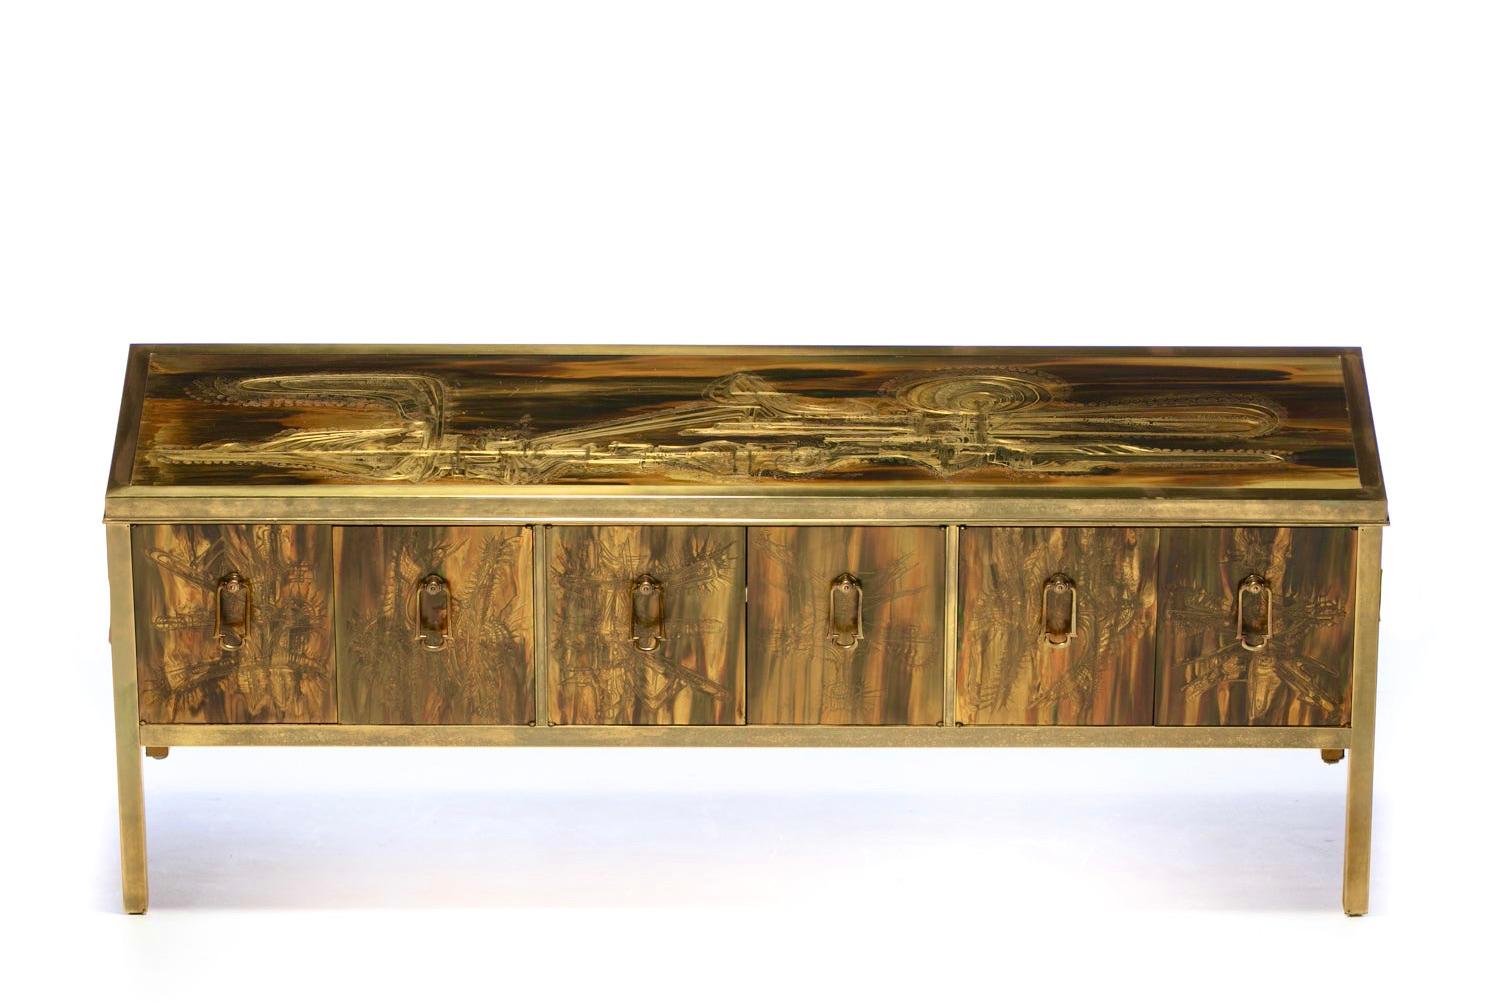 Hand-etched brass credenza or console by Bernhard Rohne for Mastercraft circa 1970s. This piece is truly furniture that's art. Artist Bernhard Rohne's acid etching technique on bronze produced some of the most uniquely beautiful pieces for